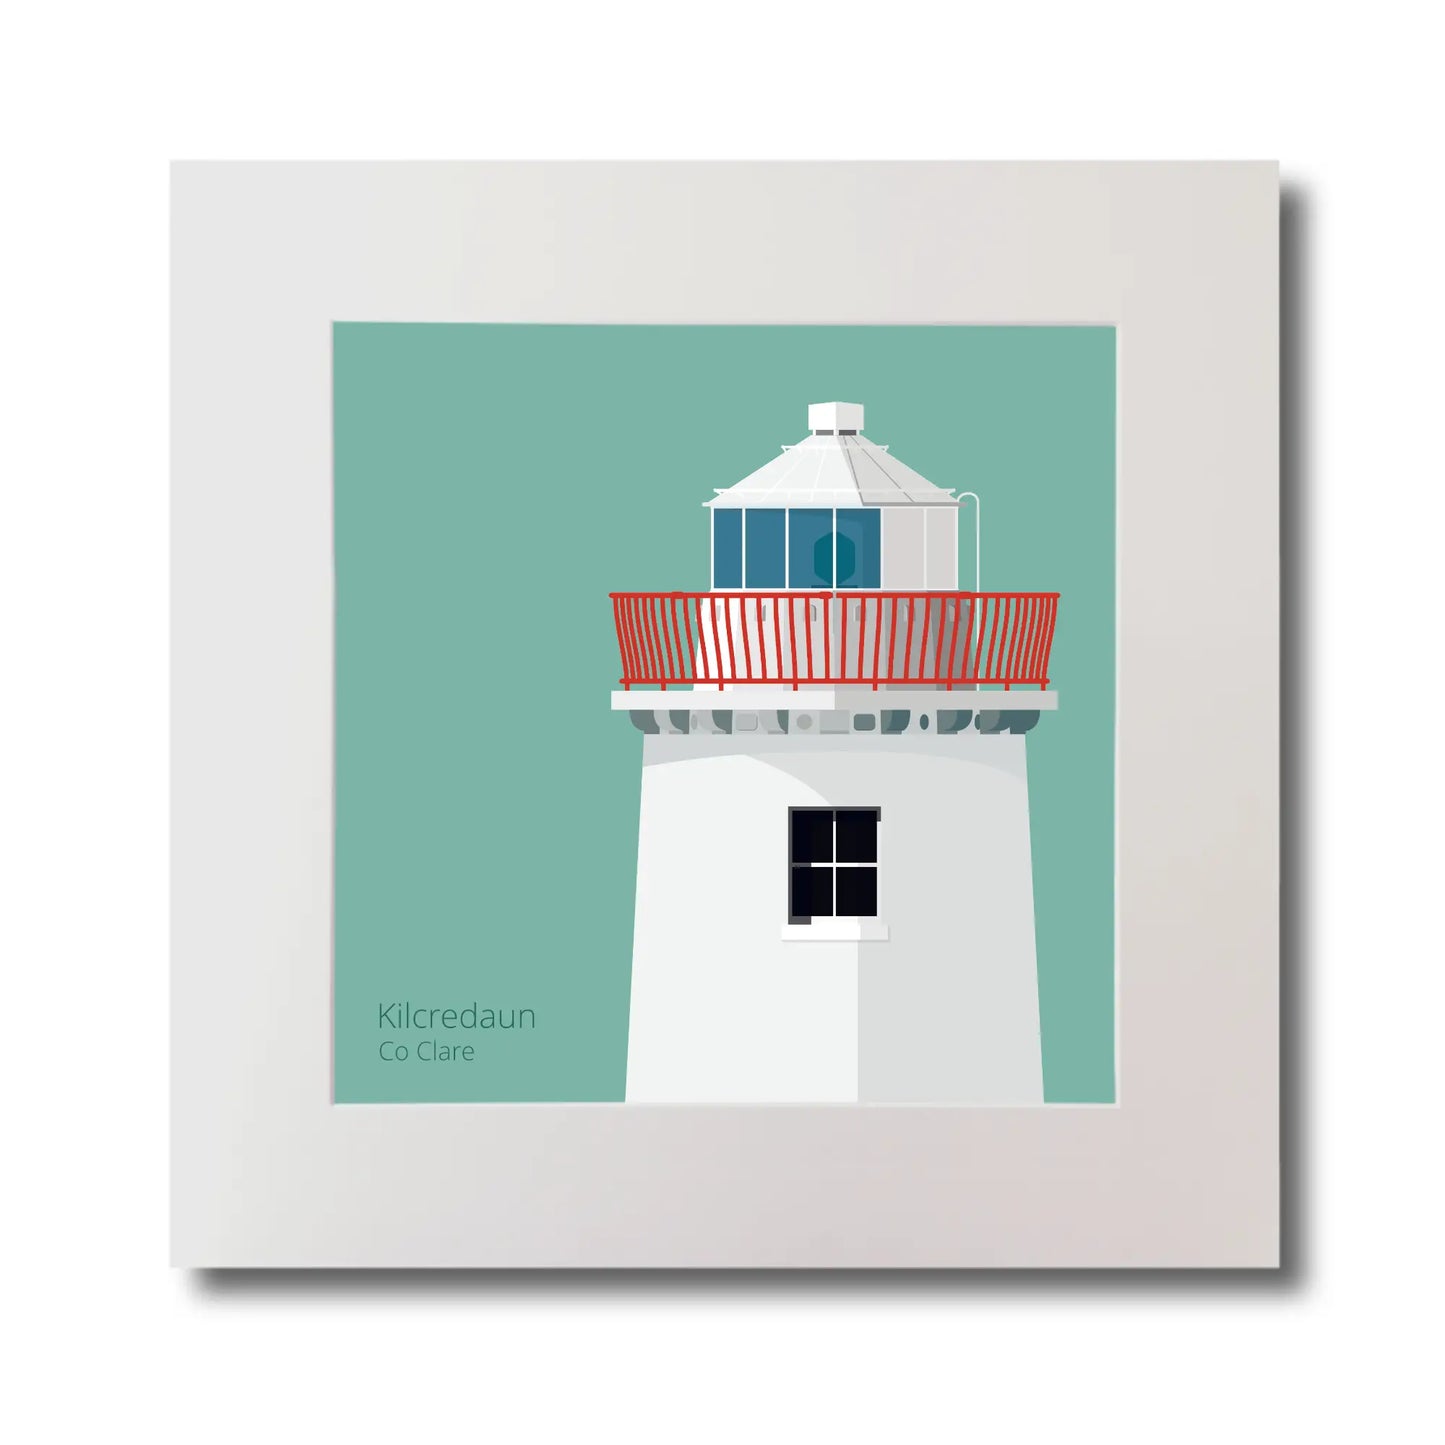 Illustration of Kilcredaun lighthouse on an ocean green background, mounted and measuring 30x30cm.